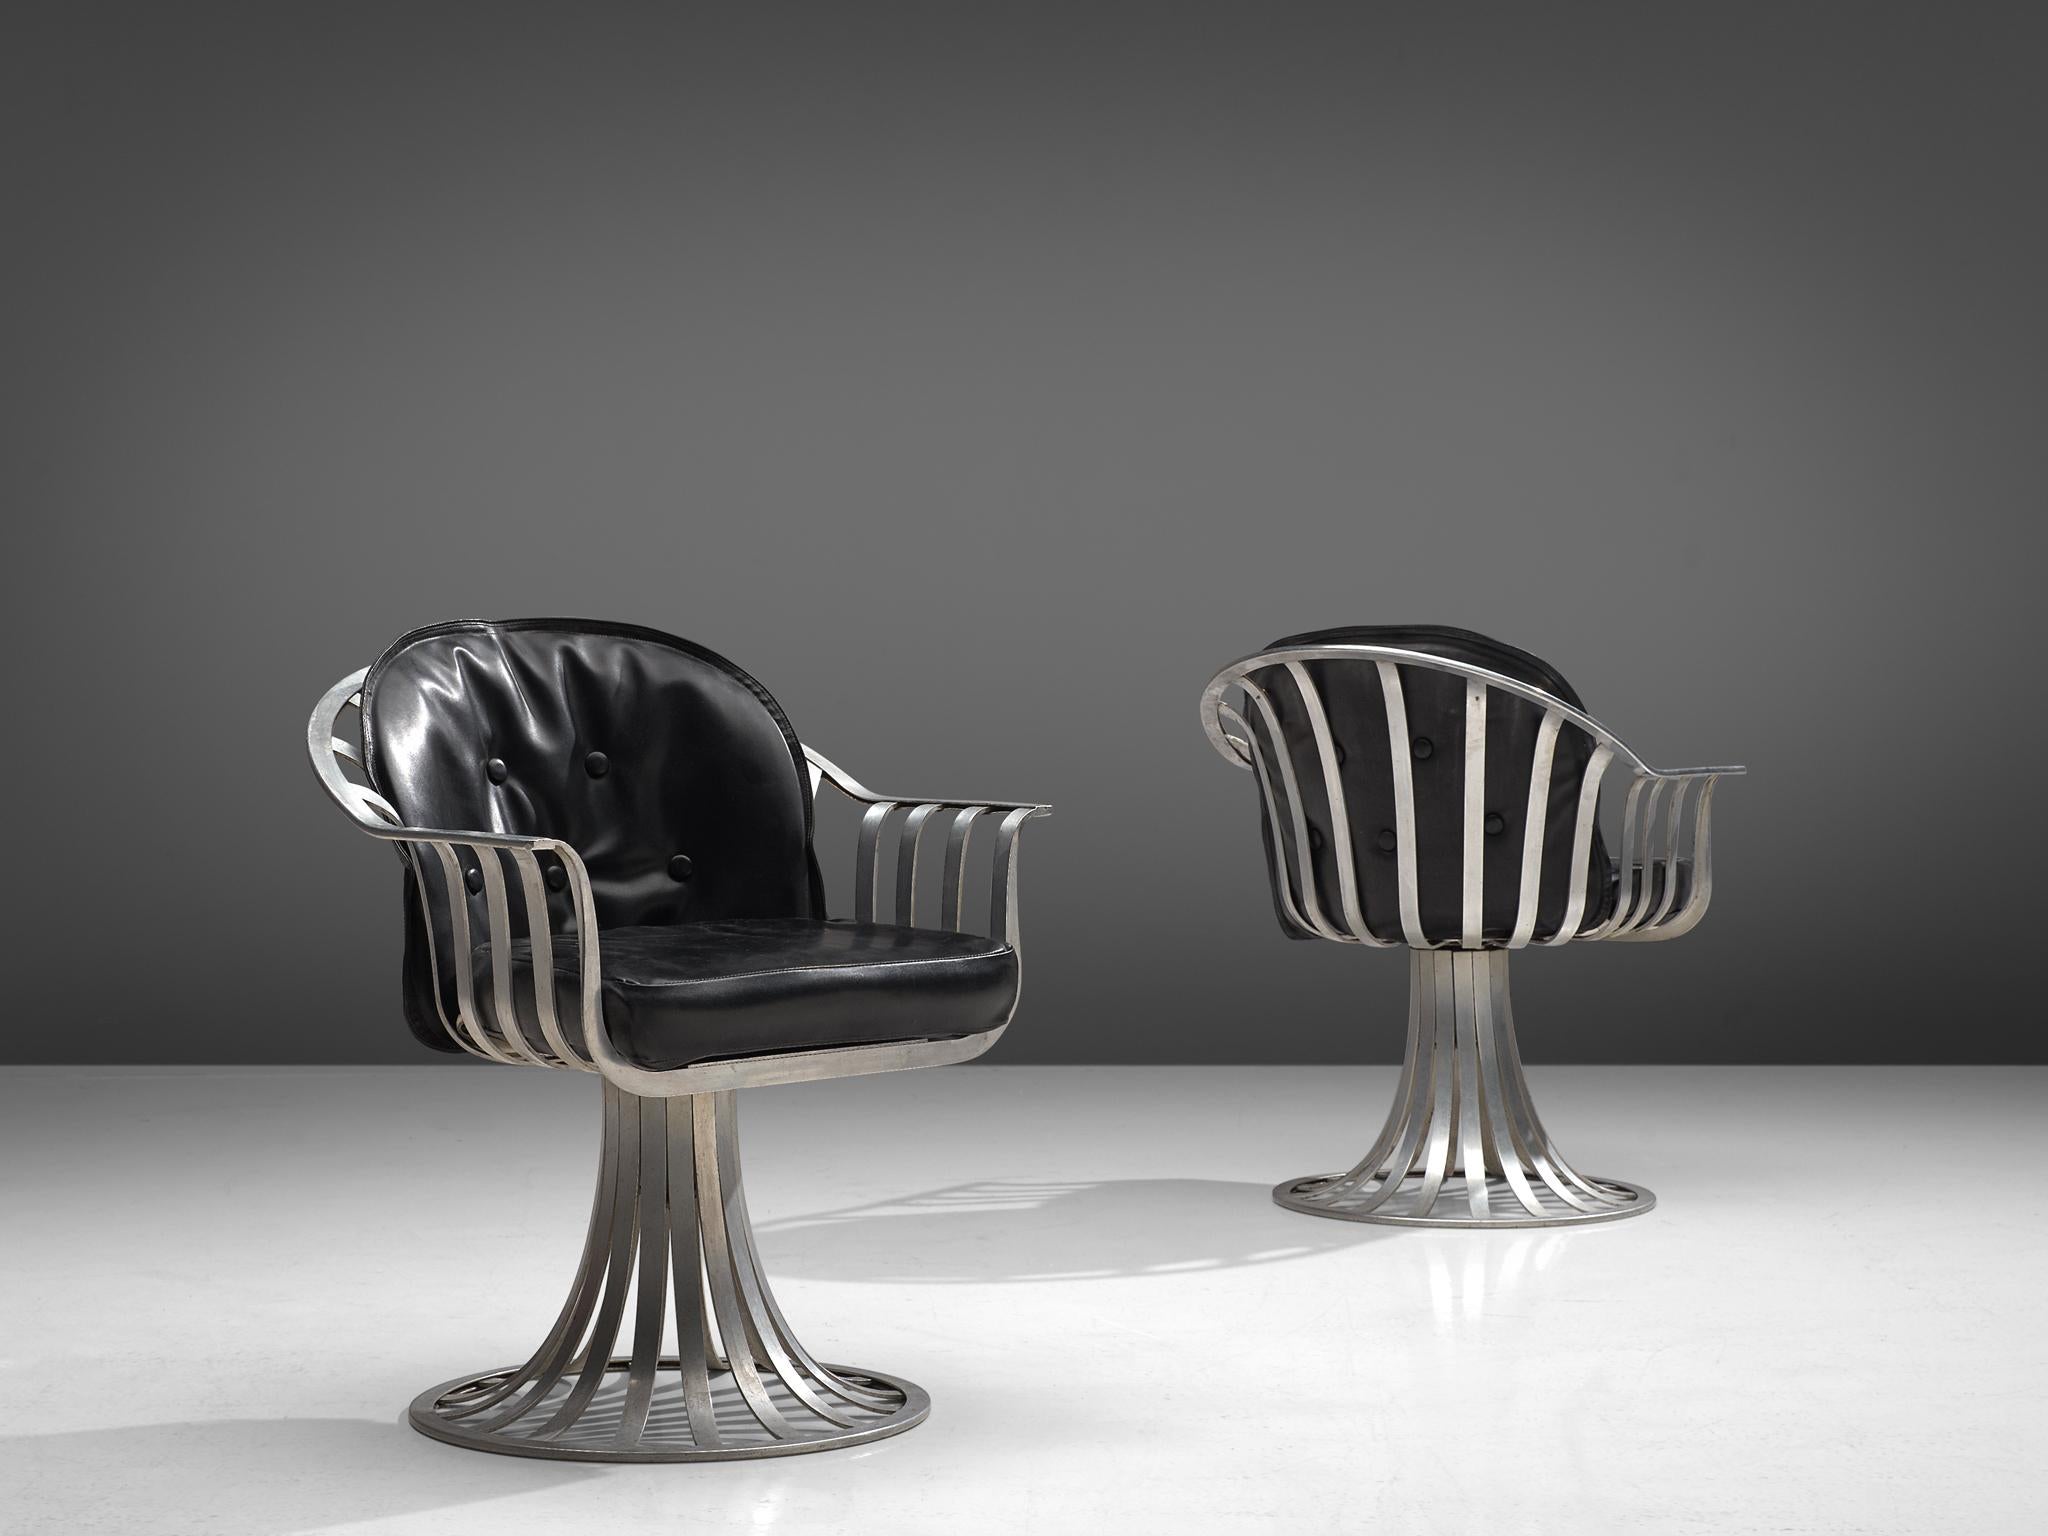 Herbert Saiger for Russell Woodard, pair of armchairs, leatherette, aluminum, United States, 1960s.

These stylized armchairs were designed by Herbert Saiger in the 1960s. Originally intended as outdoor patio furniture, it fits an indoor setting as